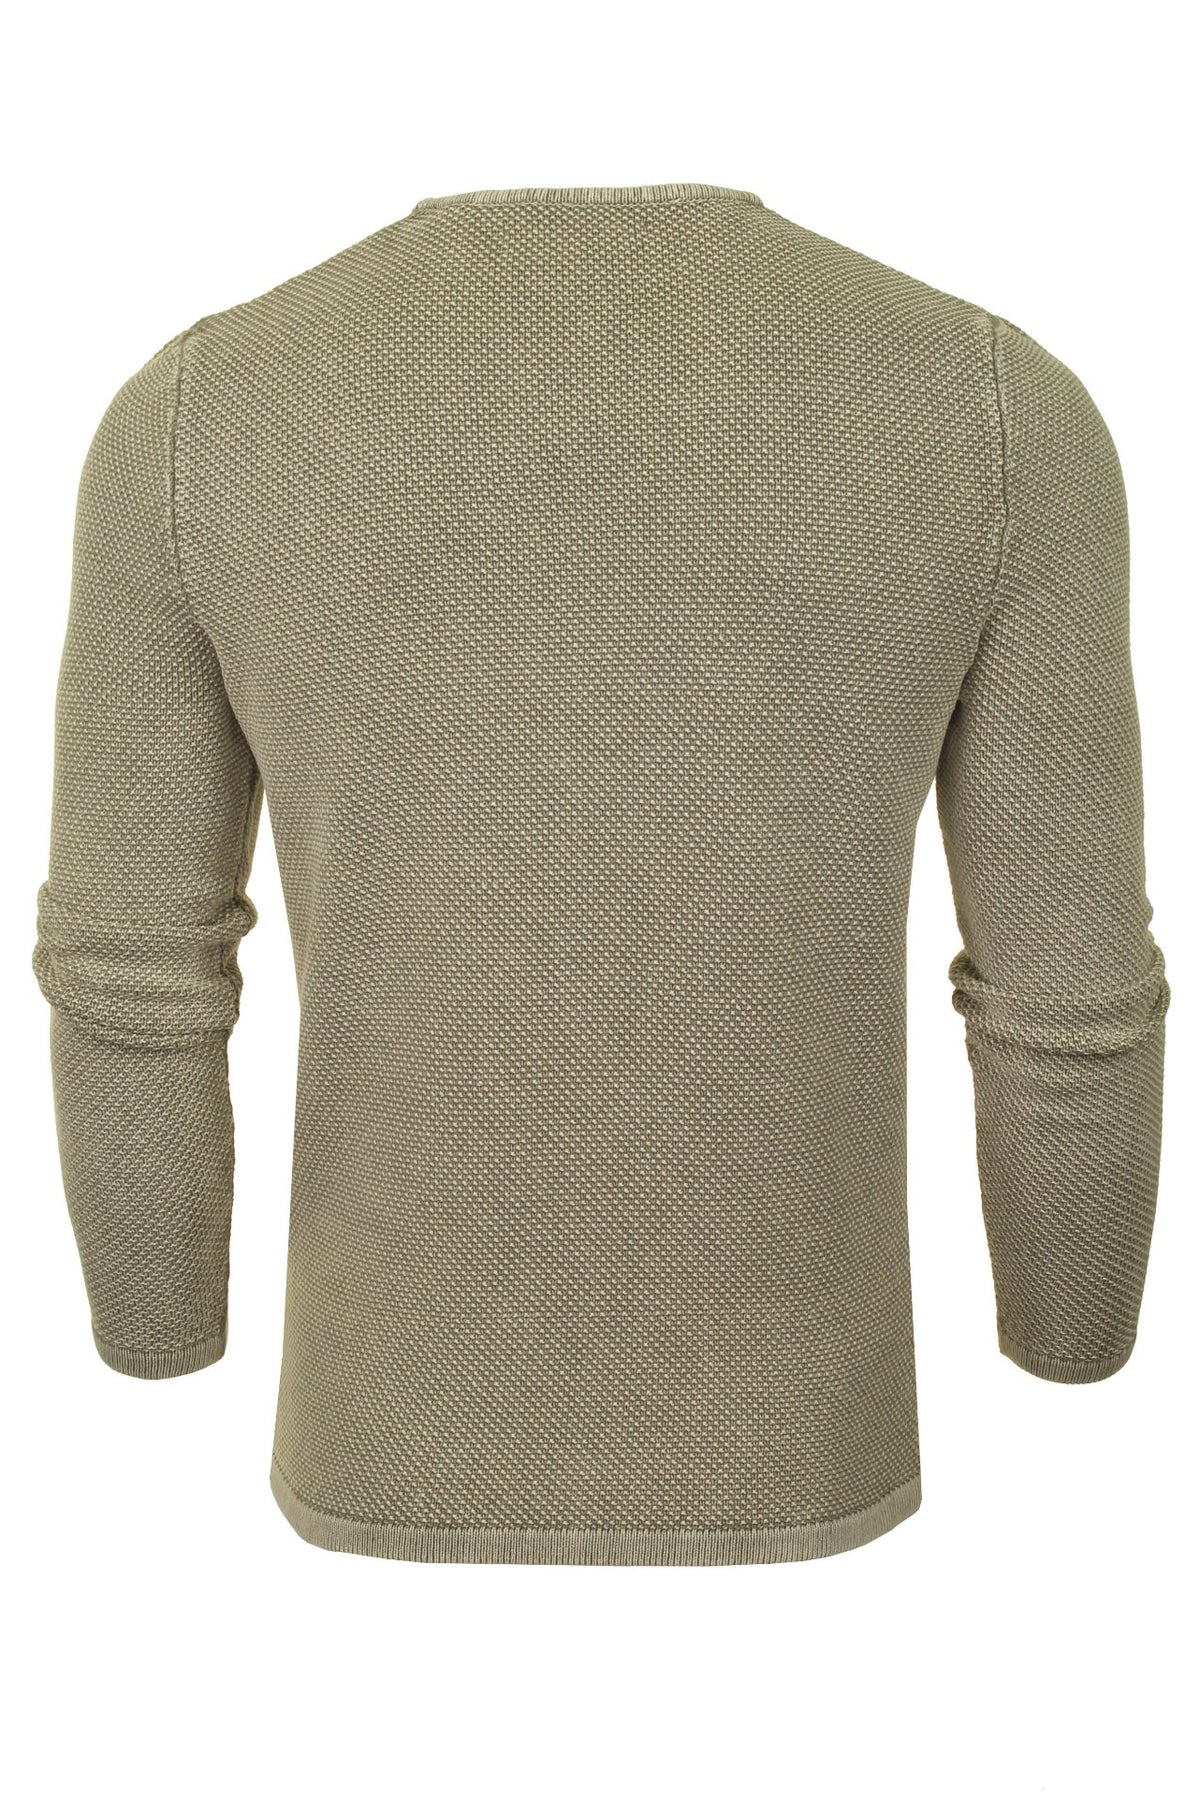 Only & Sons Mens Crew Neck Knit Jumper 'ONSHUGH' (Griffin, XL), 03, 22007422, Griffin